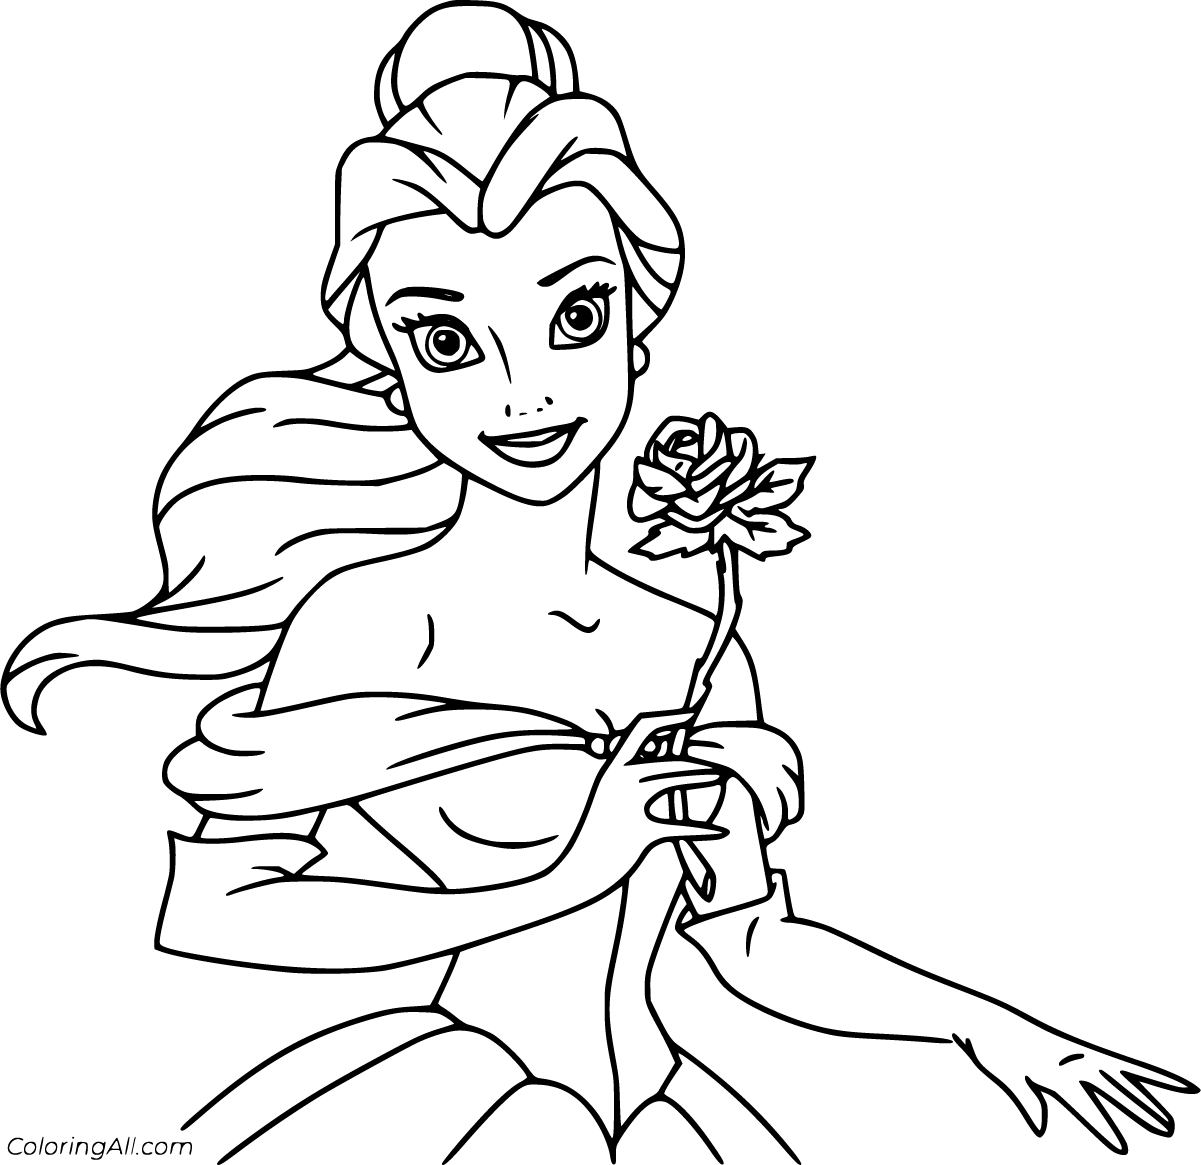 Beauty and the Beast Coloring Pages - ColoringAll